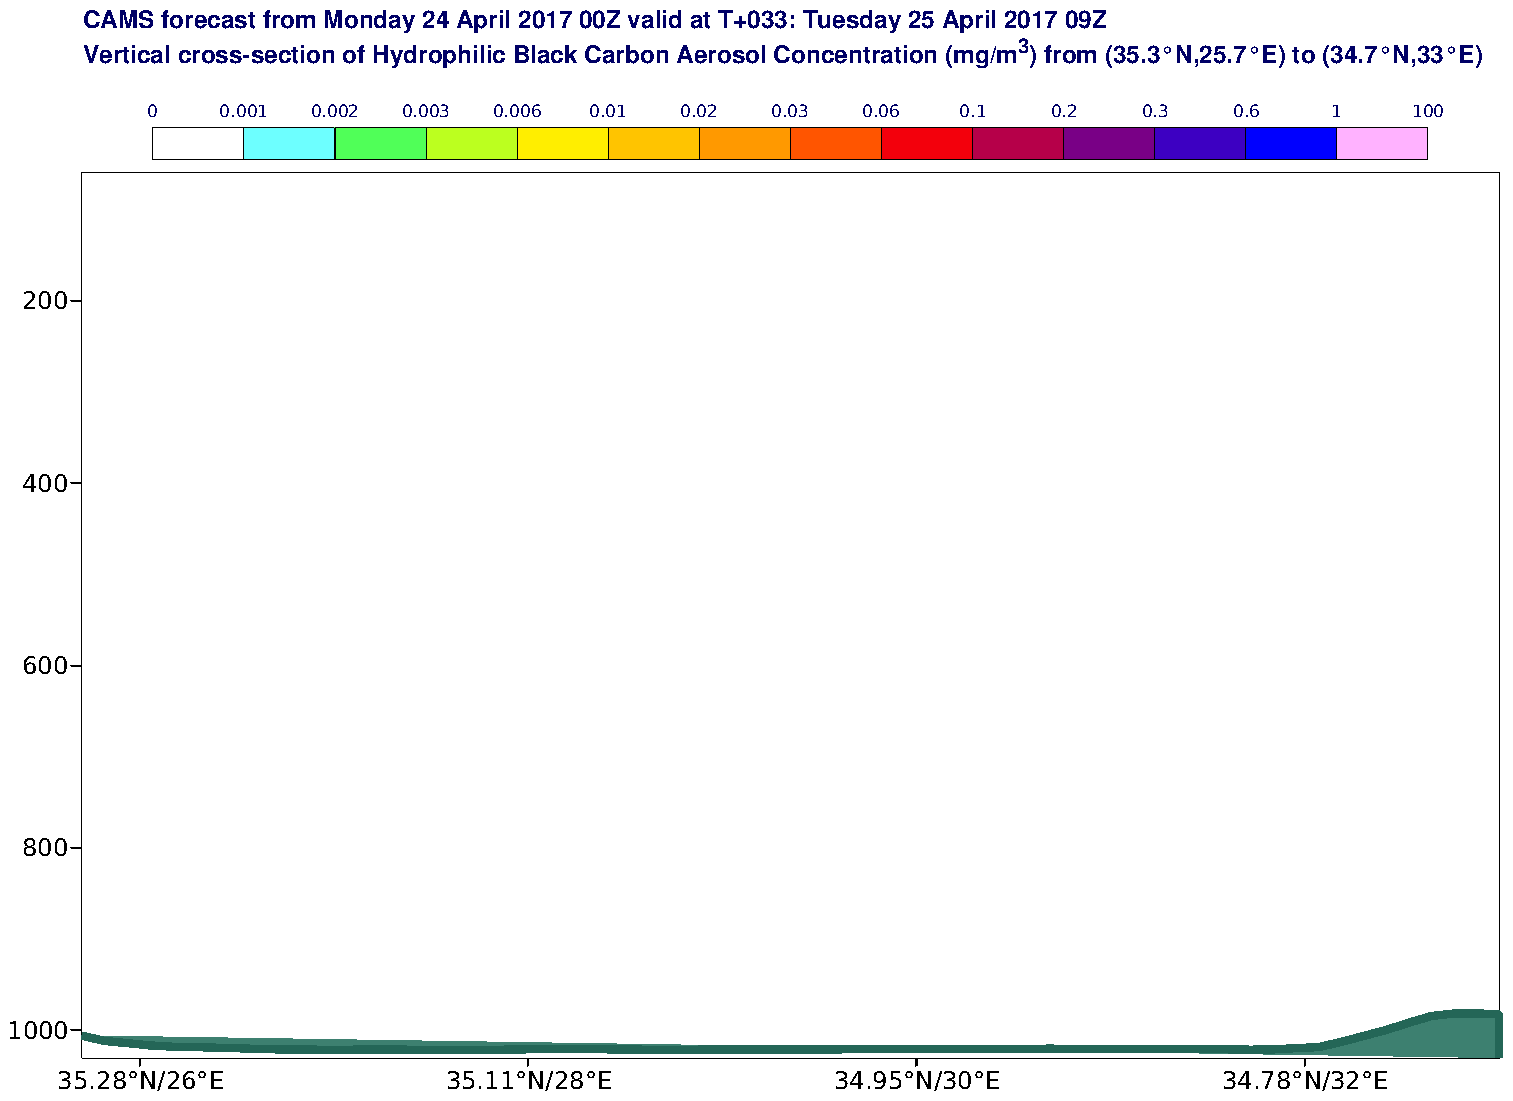 Vertical cross-section of Hydrophilic Black Carbon Aerosol Concentration (mg/m3) valid at T33 - 2017-04-25 09:00